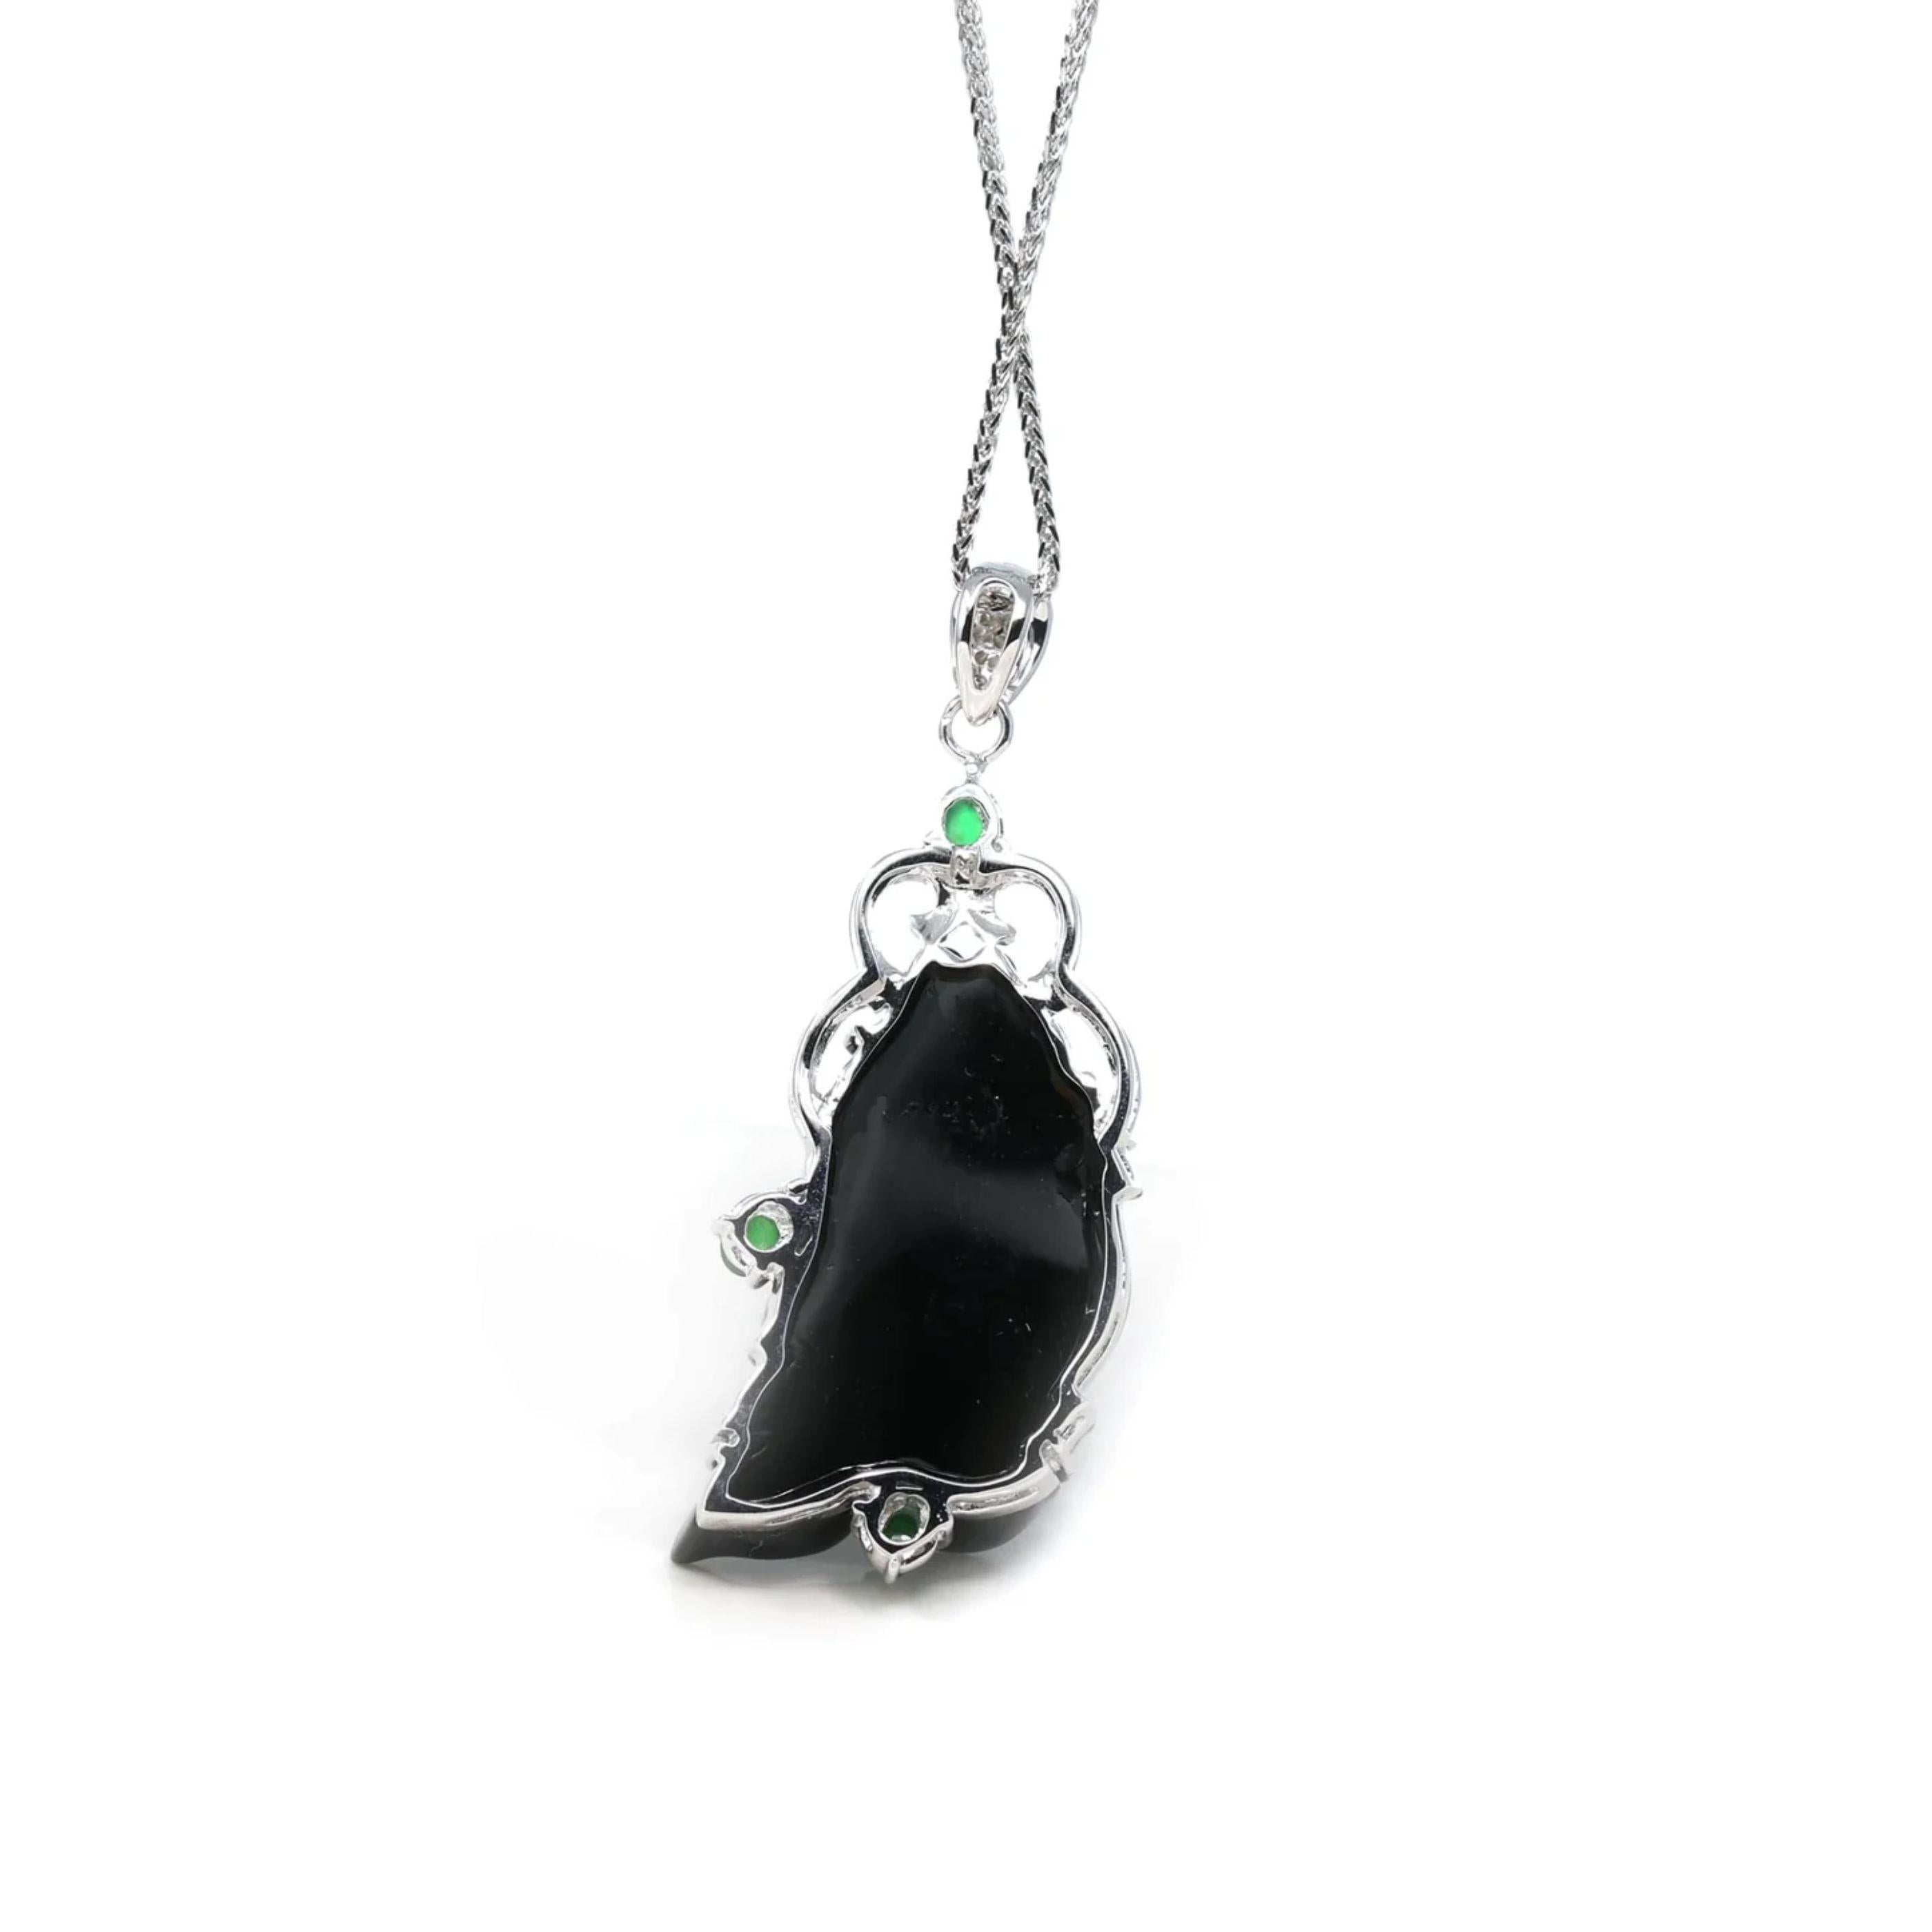 * DESIGN CONCEPT--- One of a kind black jadeite jade necklace. The jadeite texture is so smooth. The motif of a fish comes from a saying in Chinese that represents prosperity in the next year. Truly one of a kind.
Jade represents good luck, wealth,